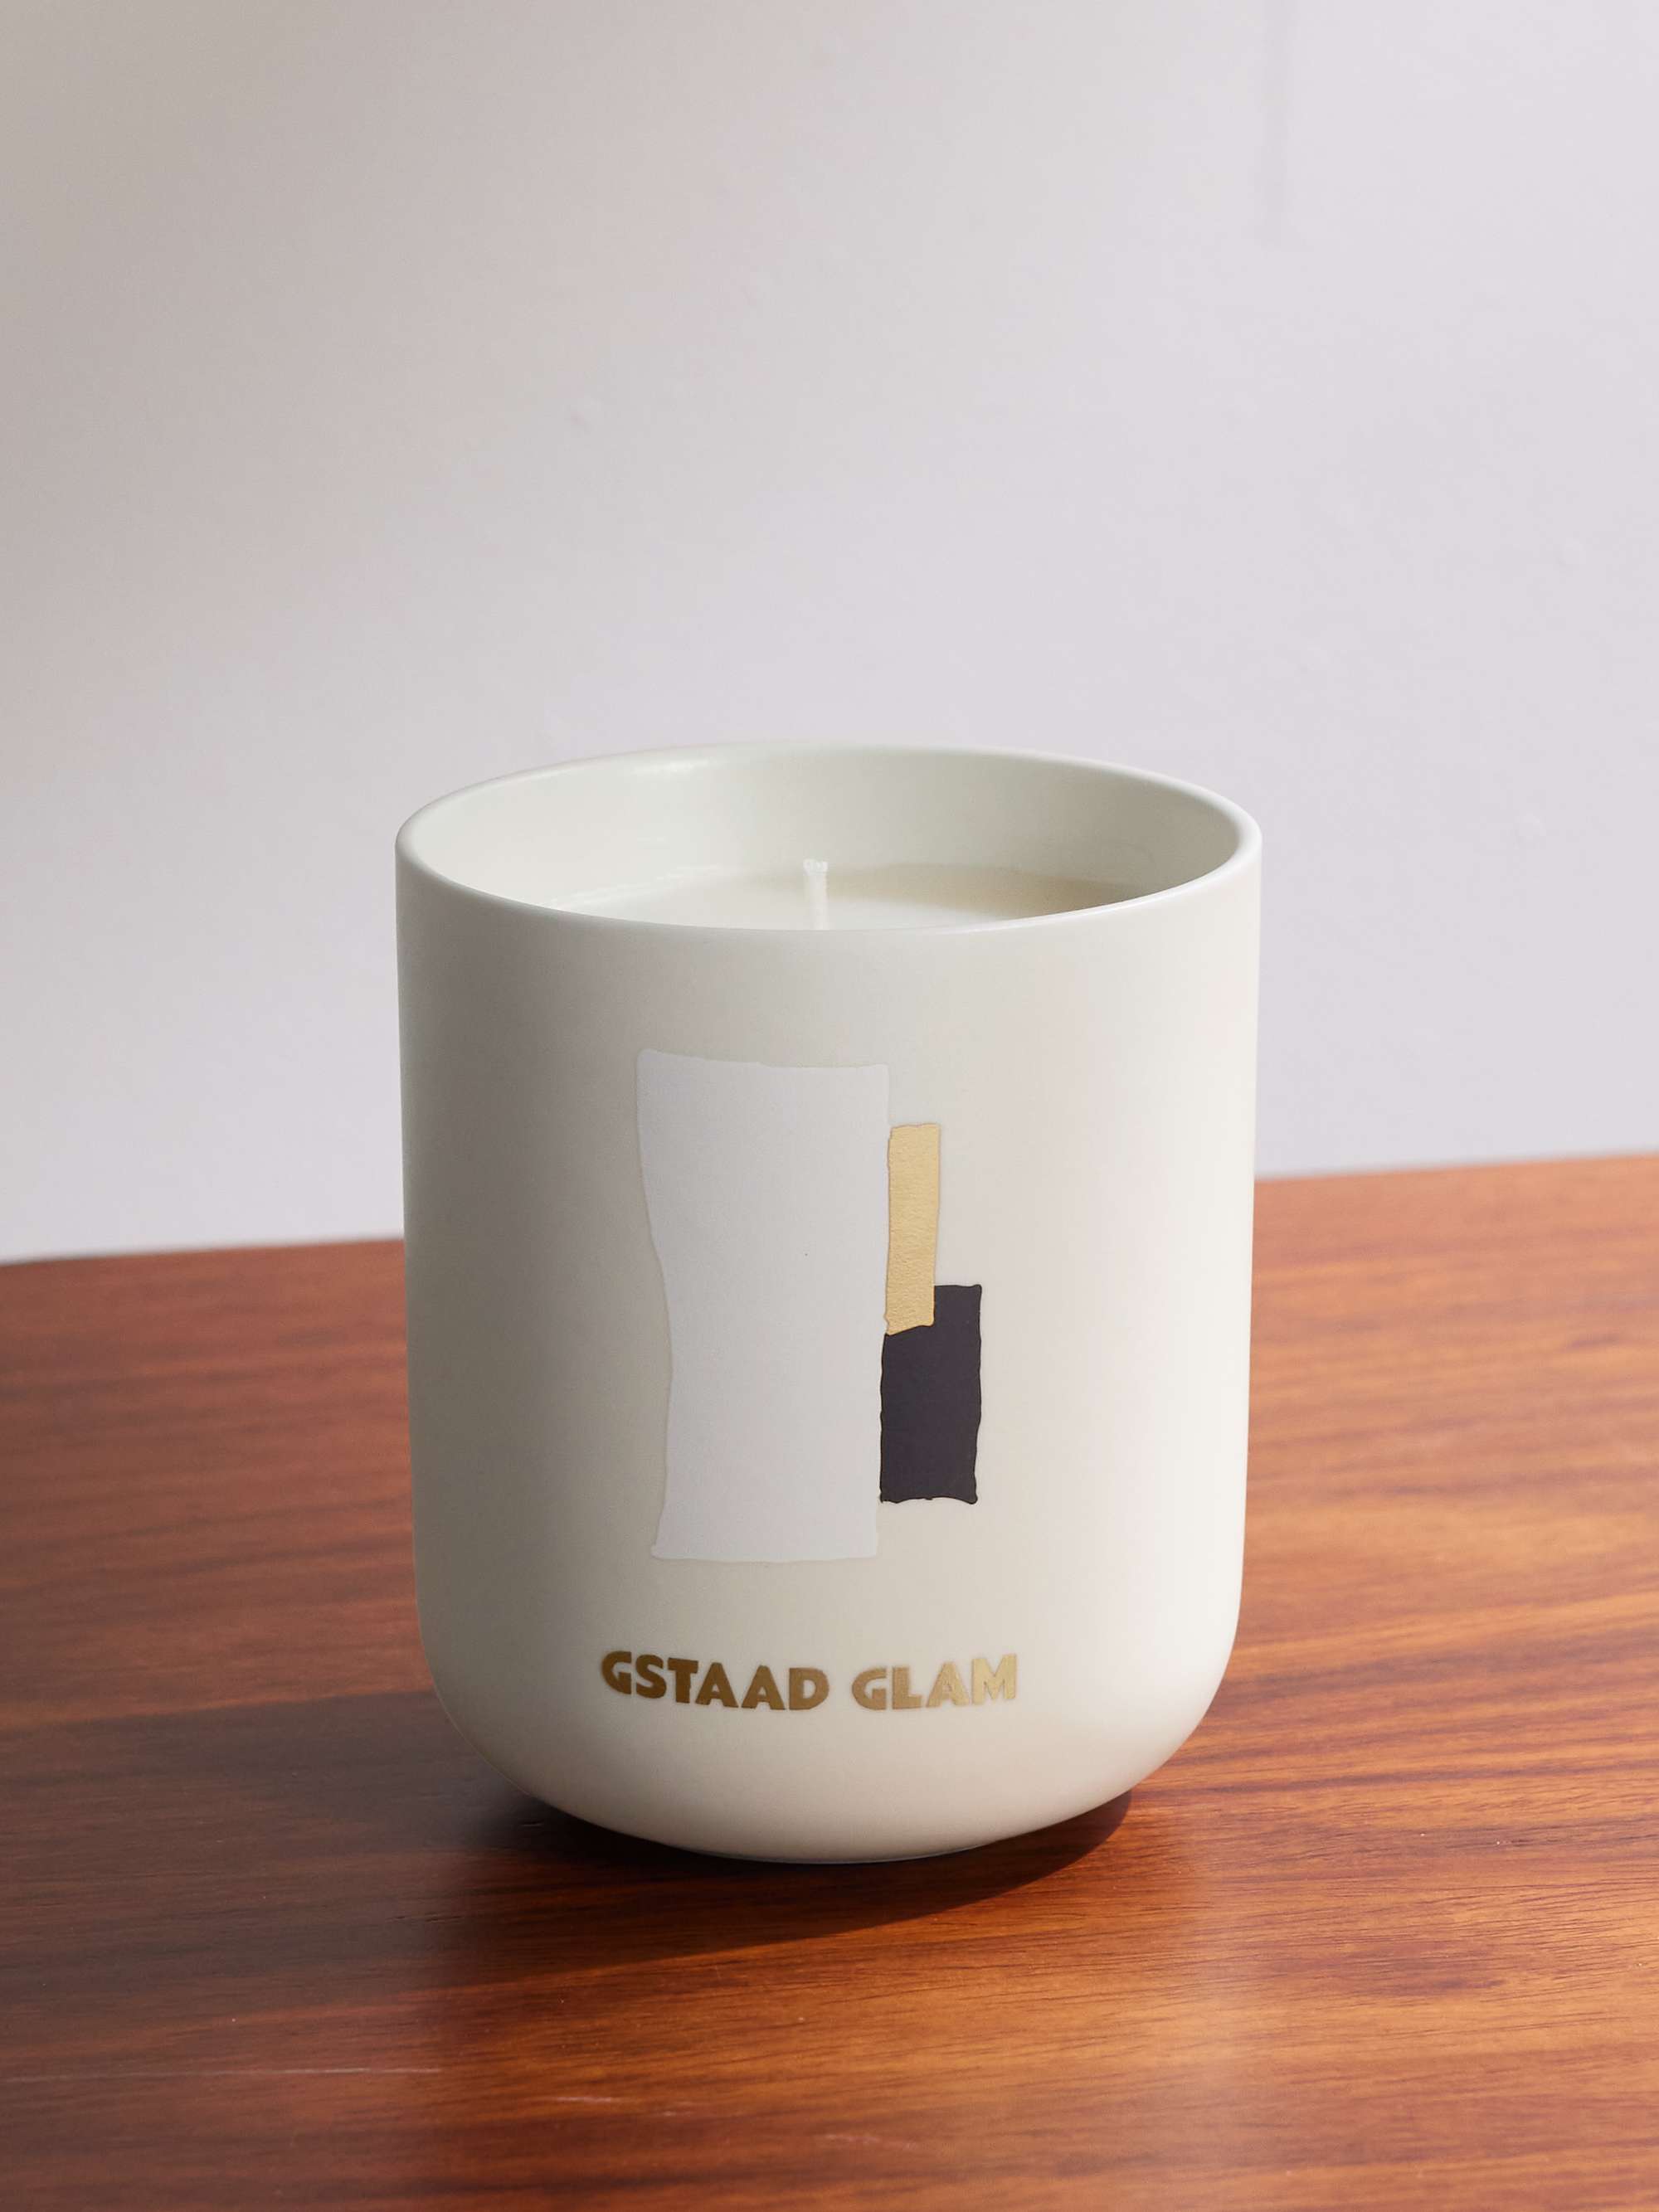 ASSOULINE Gstaad Glam Scented Candle, 319g